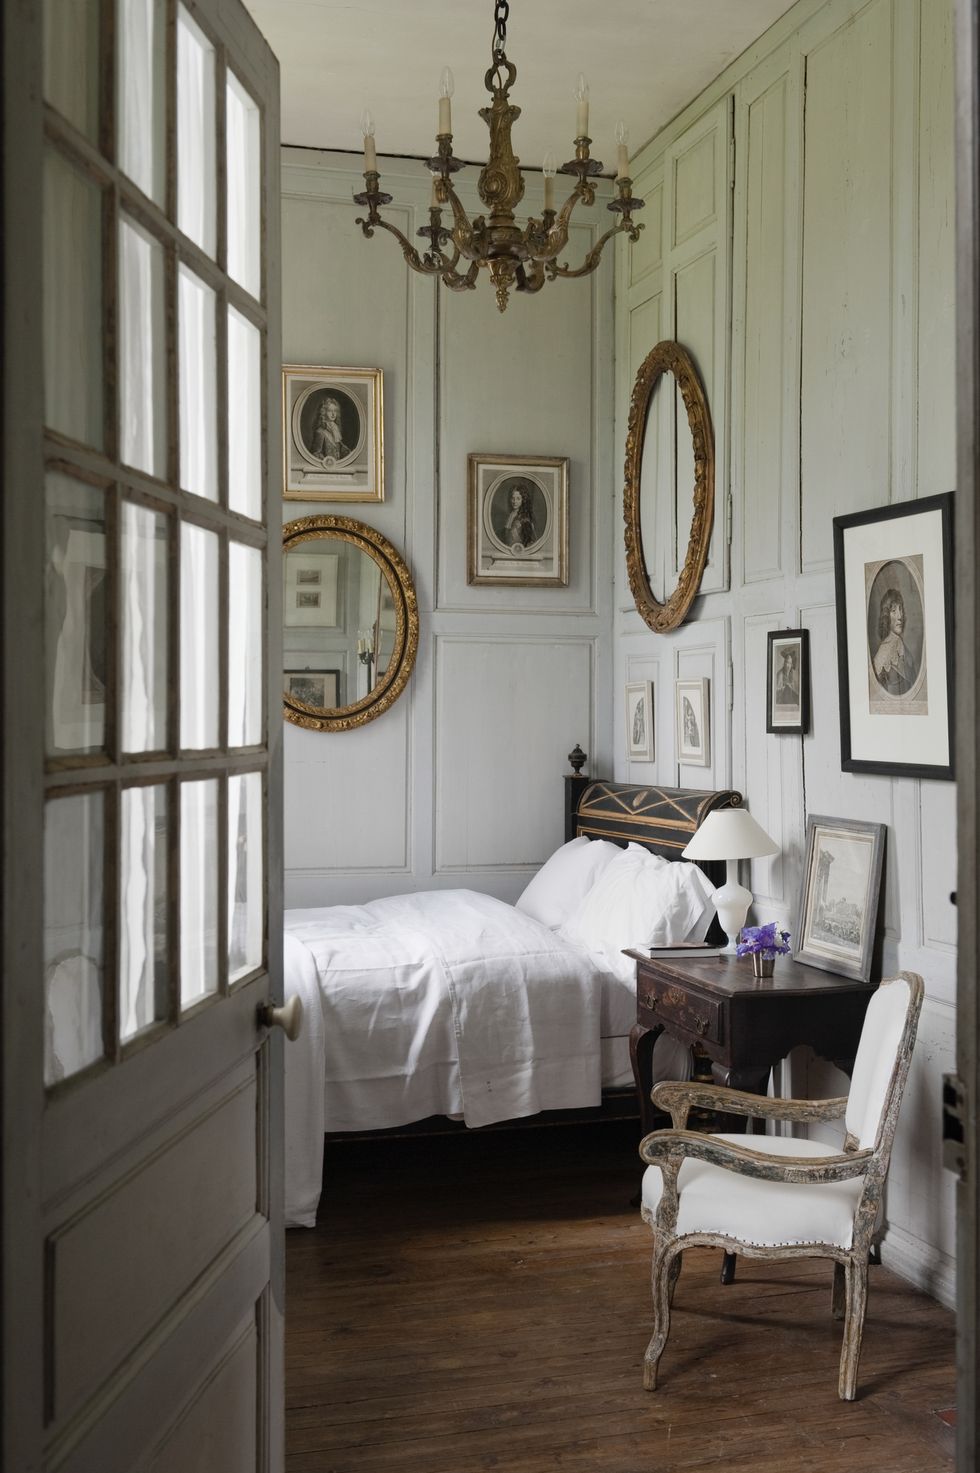 view through open doorway to charming bedroom with wooden wall panelling and french antiques